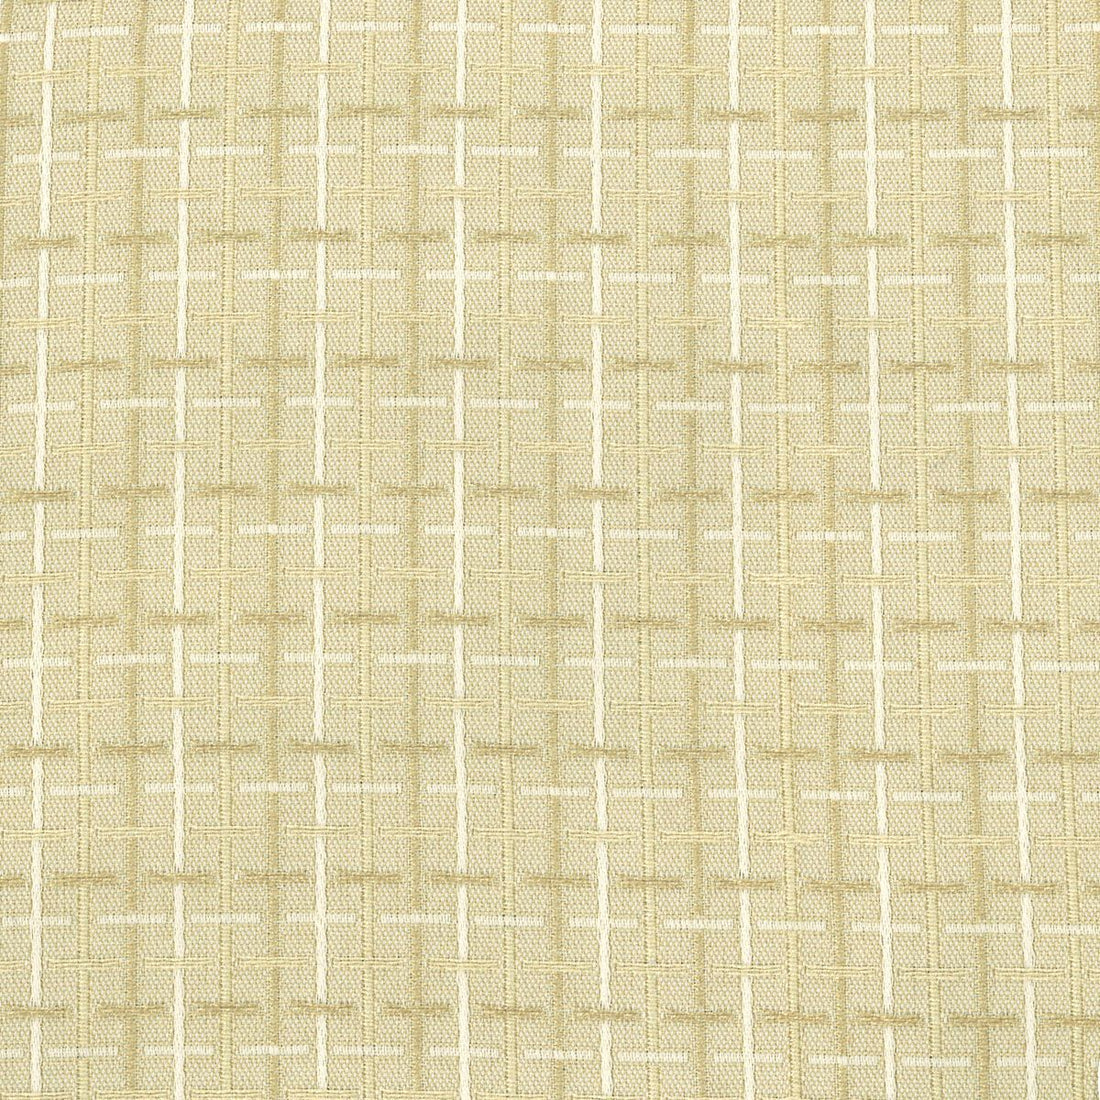 Lexington fabric in beige color - pattern number MT 0005MT67 - by Scalamandre in the Old World Weavers collection